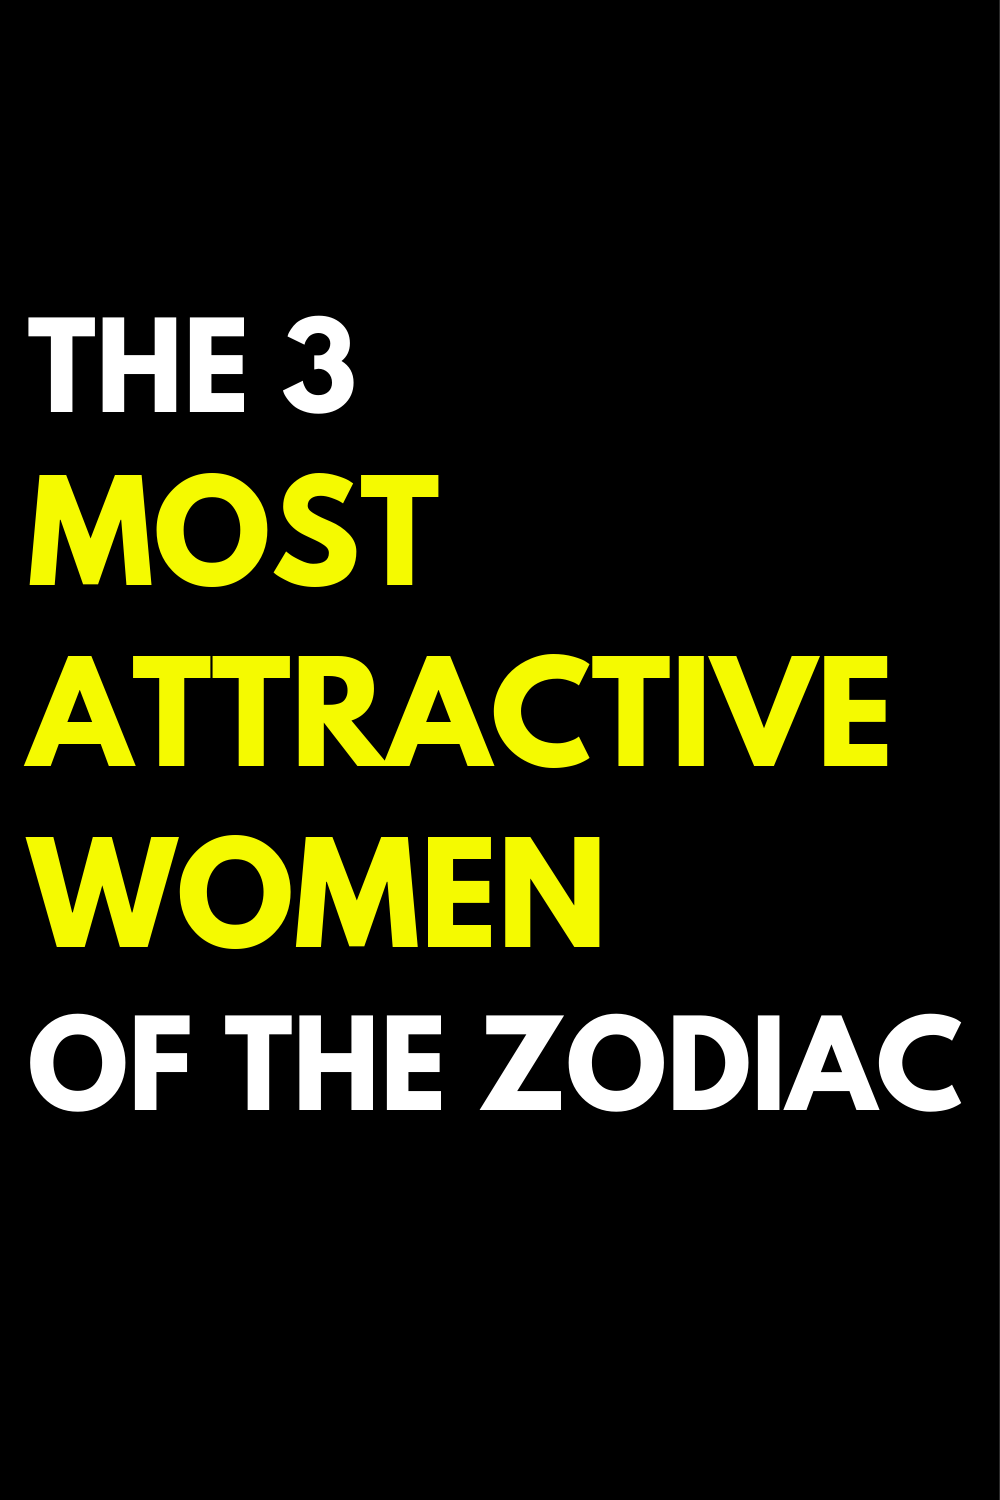 The 3 Most Attractive Women Of The Zodiac